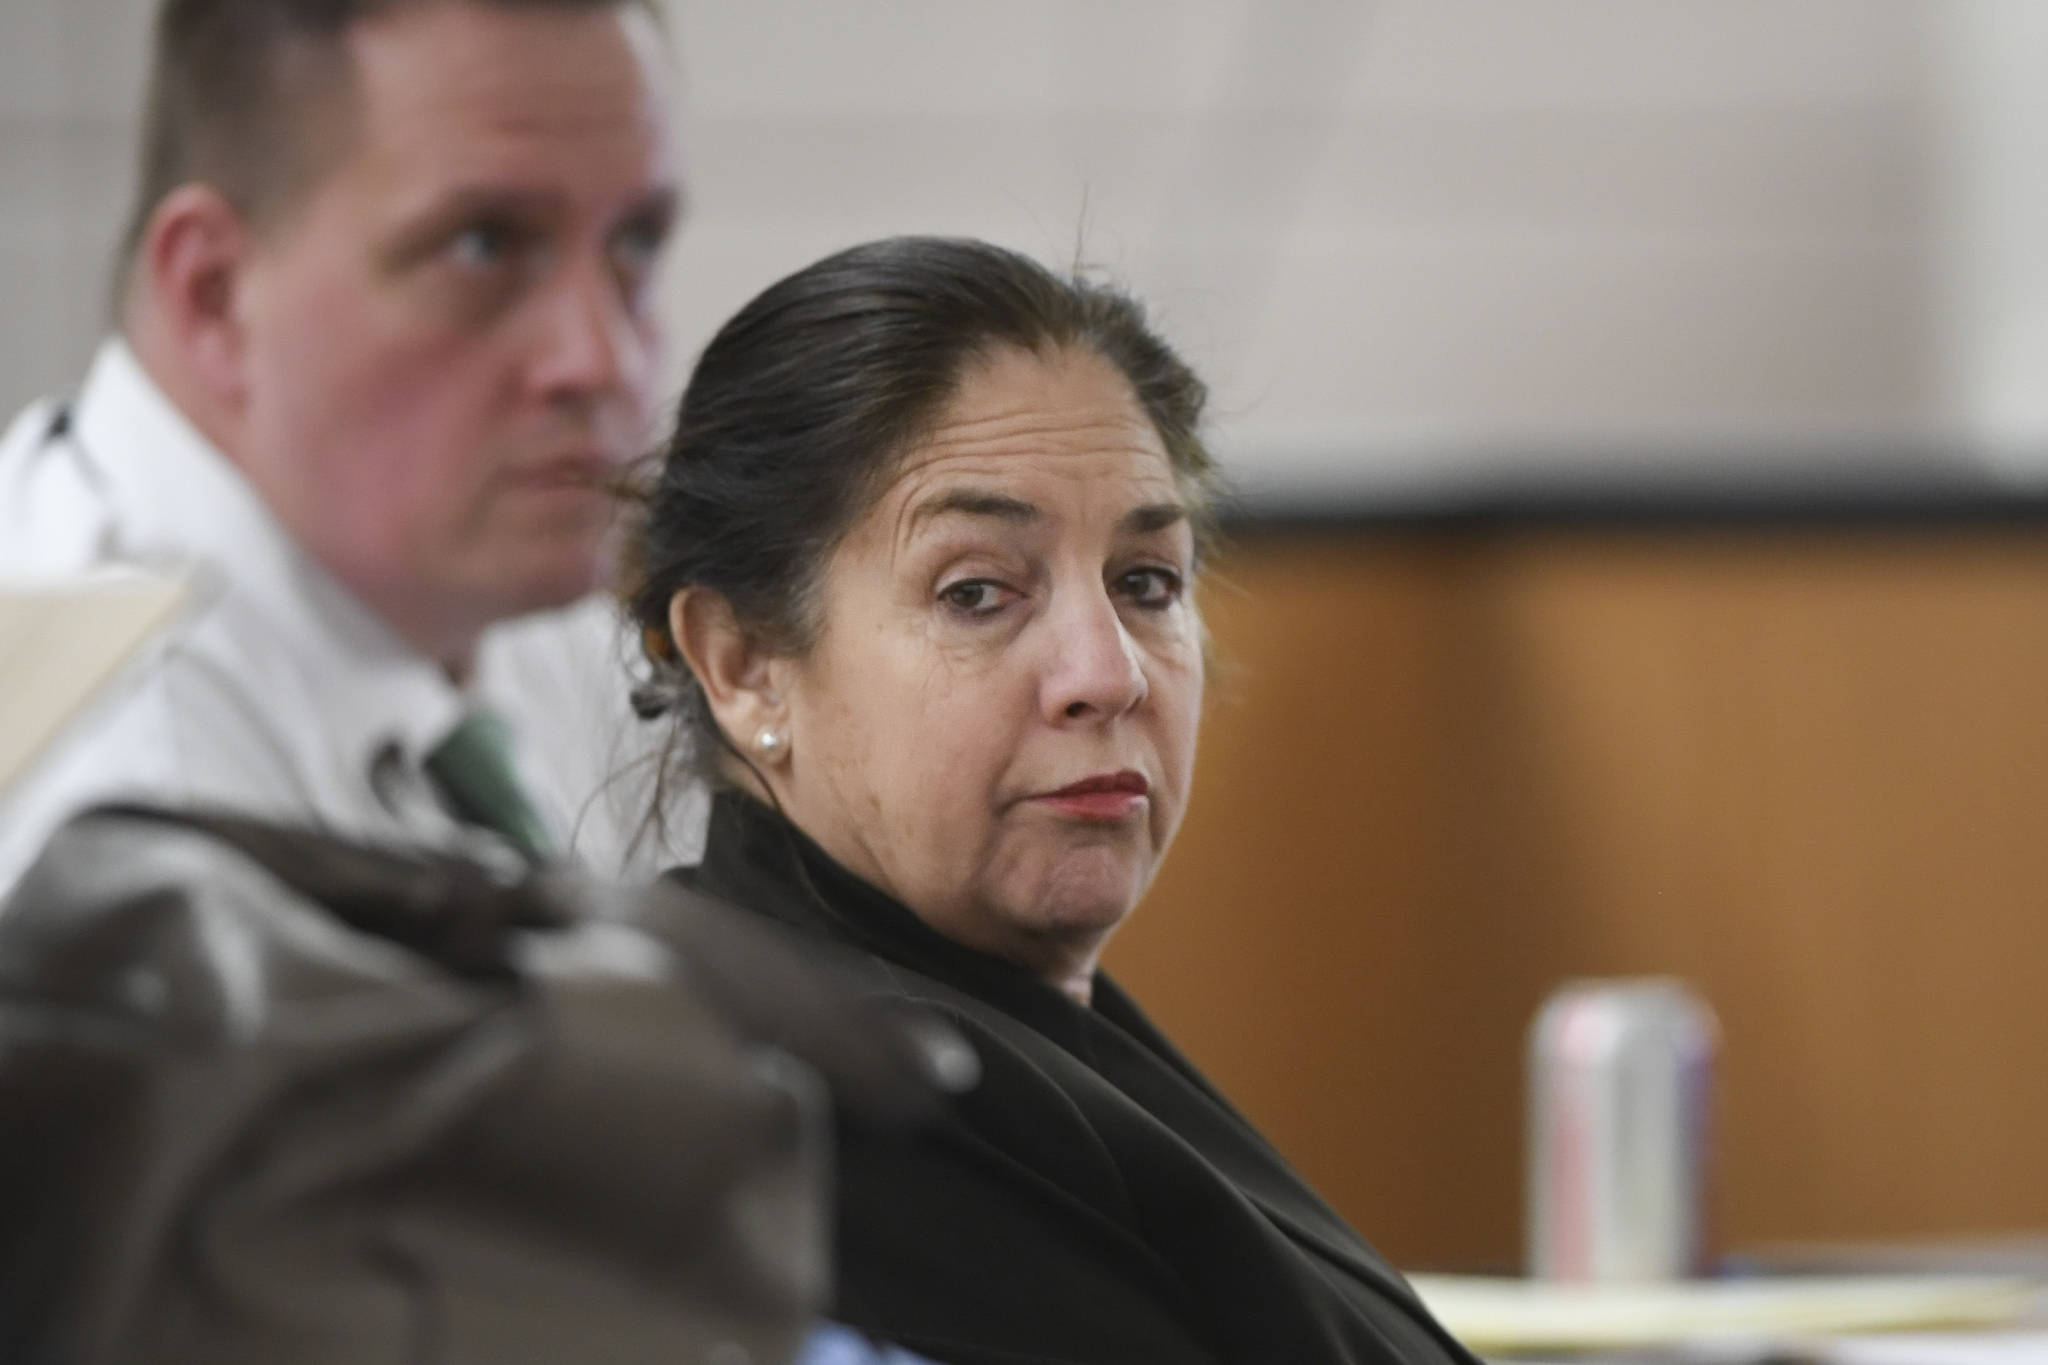 Loretto Lee Jones, 65, appears in Juneau Superior Court on Thursday, Oct. 31, 2019, during her trial on Alaska Permanent Fund Dividend felony theft and fraud. The two charges stem from allegations that Jones filed for her PFD payout in 2016 while having resided outside the state for more than 180 days. (Michael Penn | Juneau Empire)